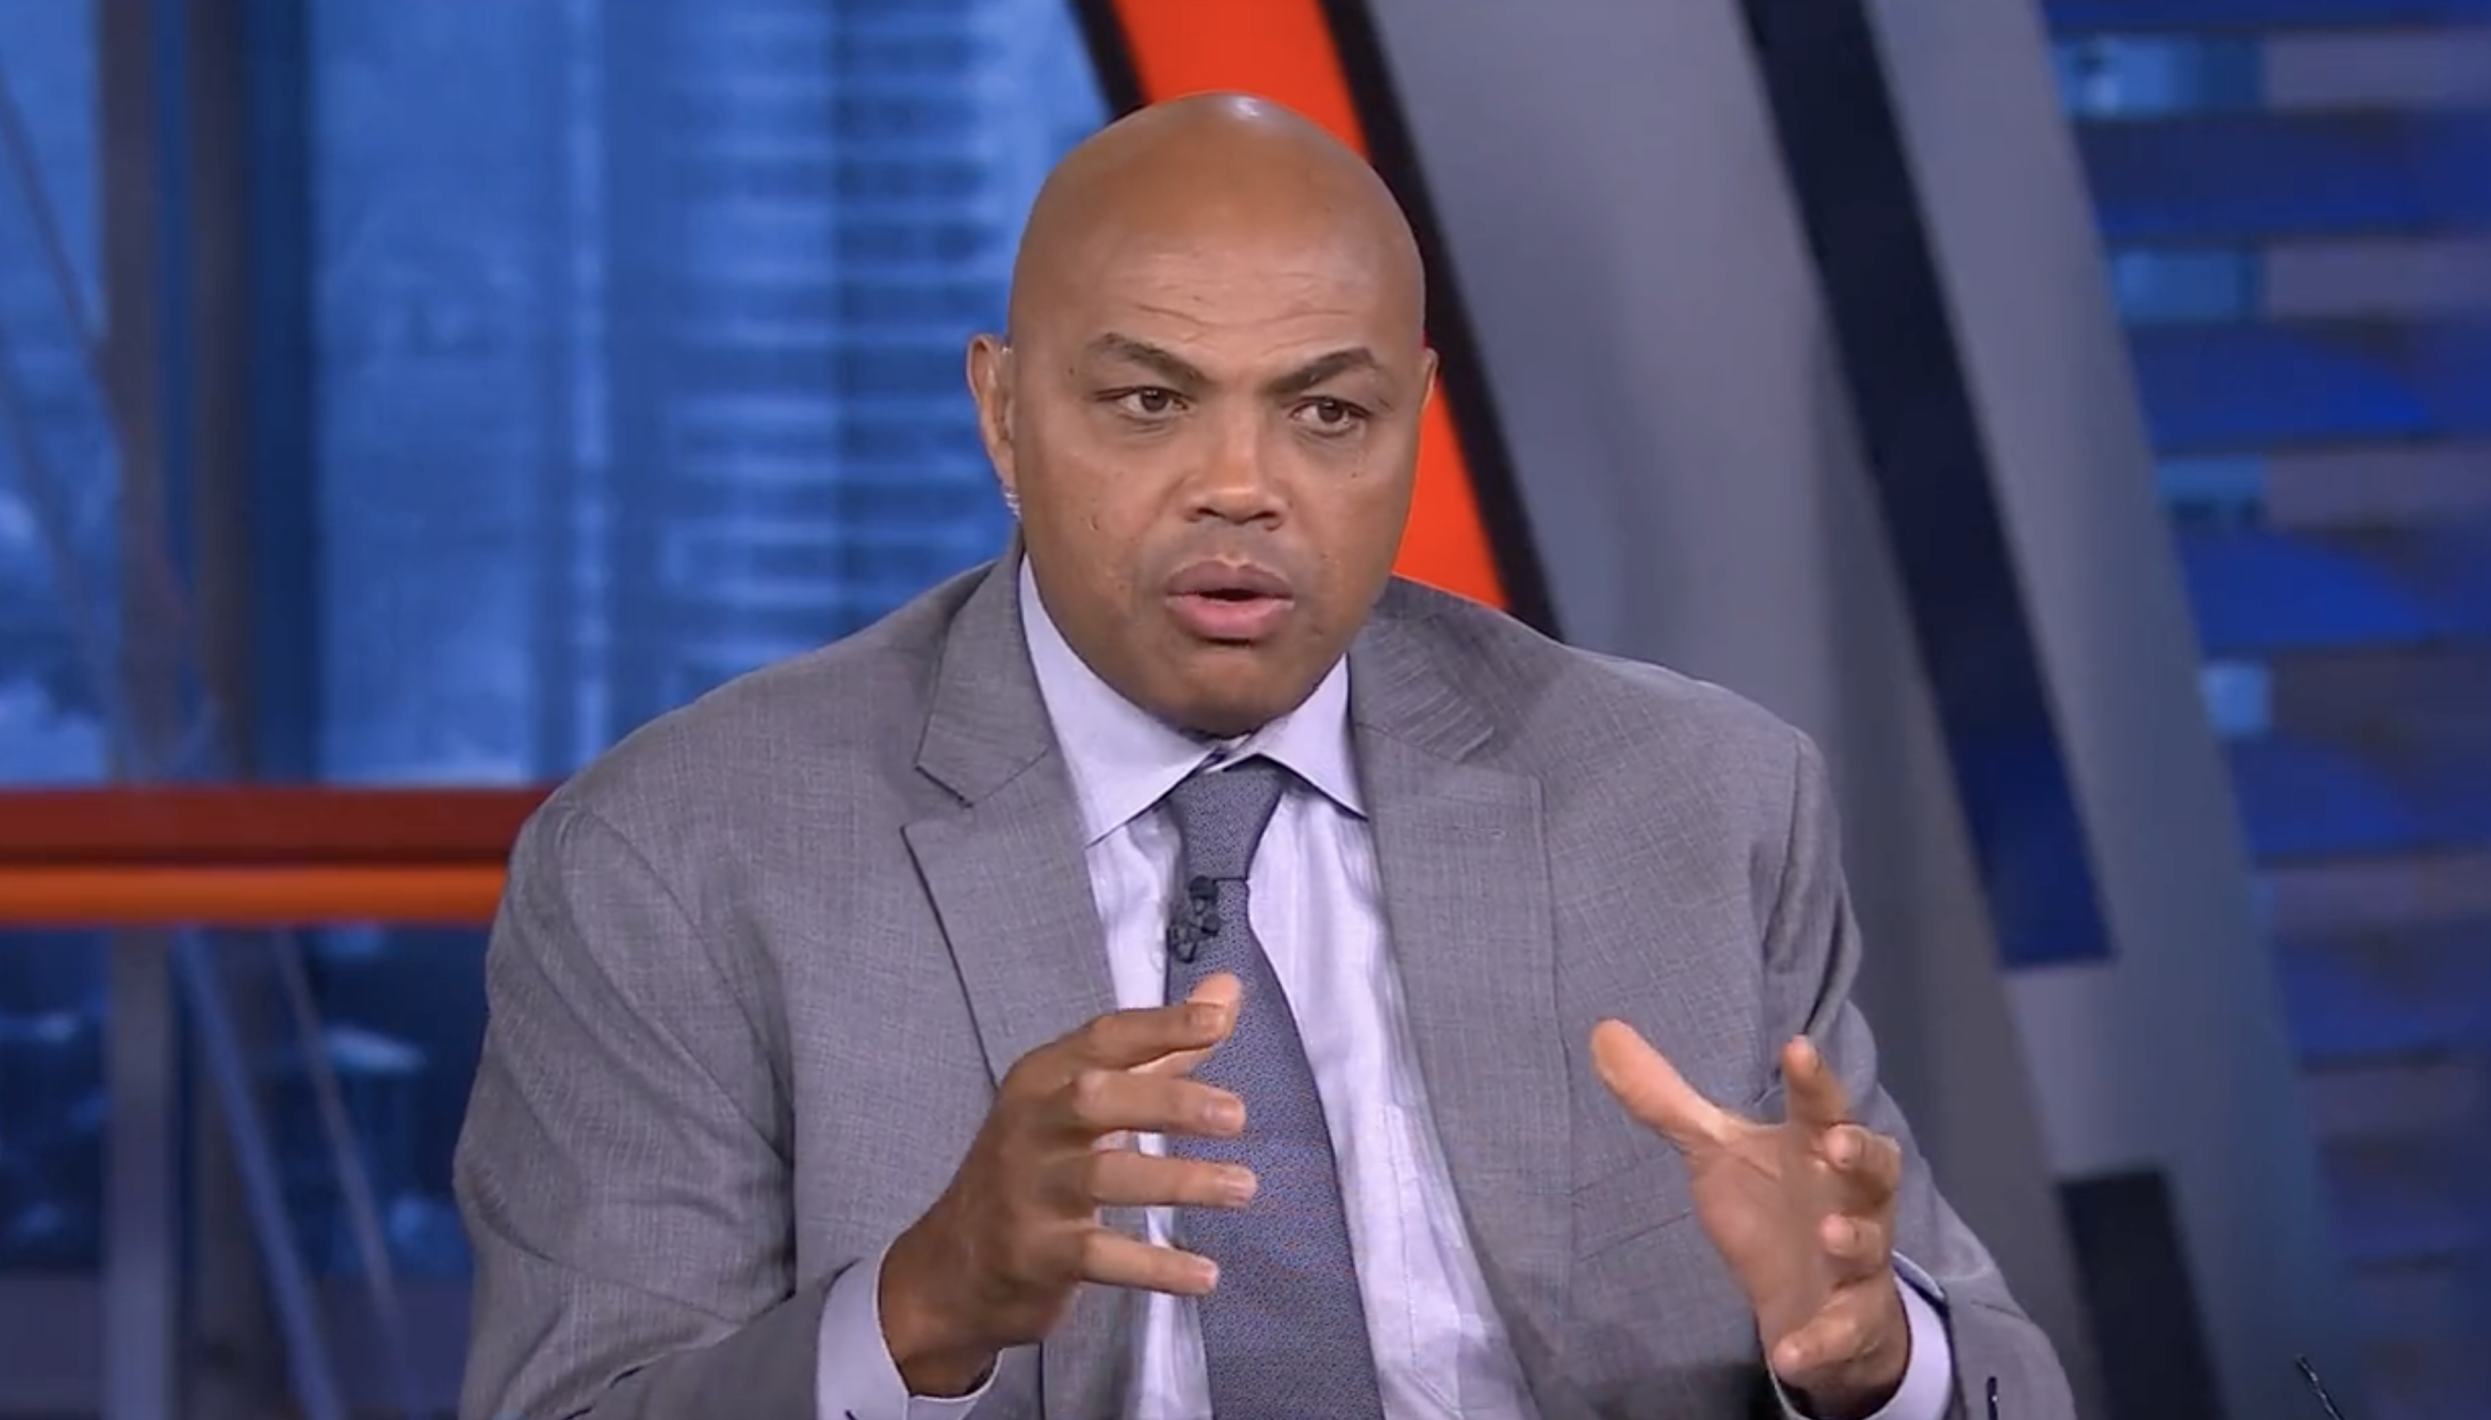 Charles Barkley Says Newly-Fired Lakers Coach Frank Vogel is ‘Getting Screwed,’ Blames Lakers Woes on ‘Whoever Put These Old-A** Geezers Together’